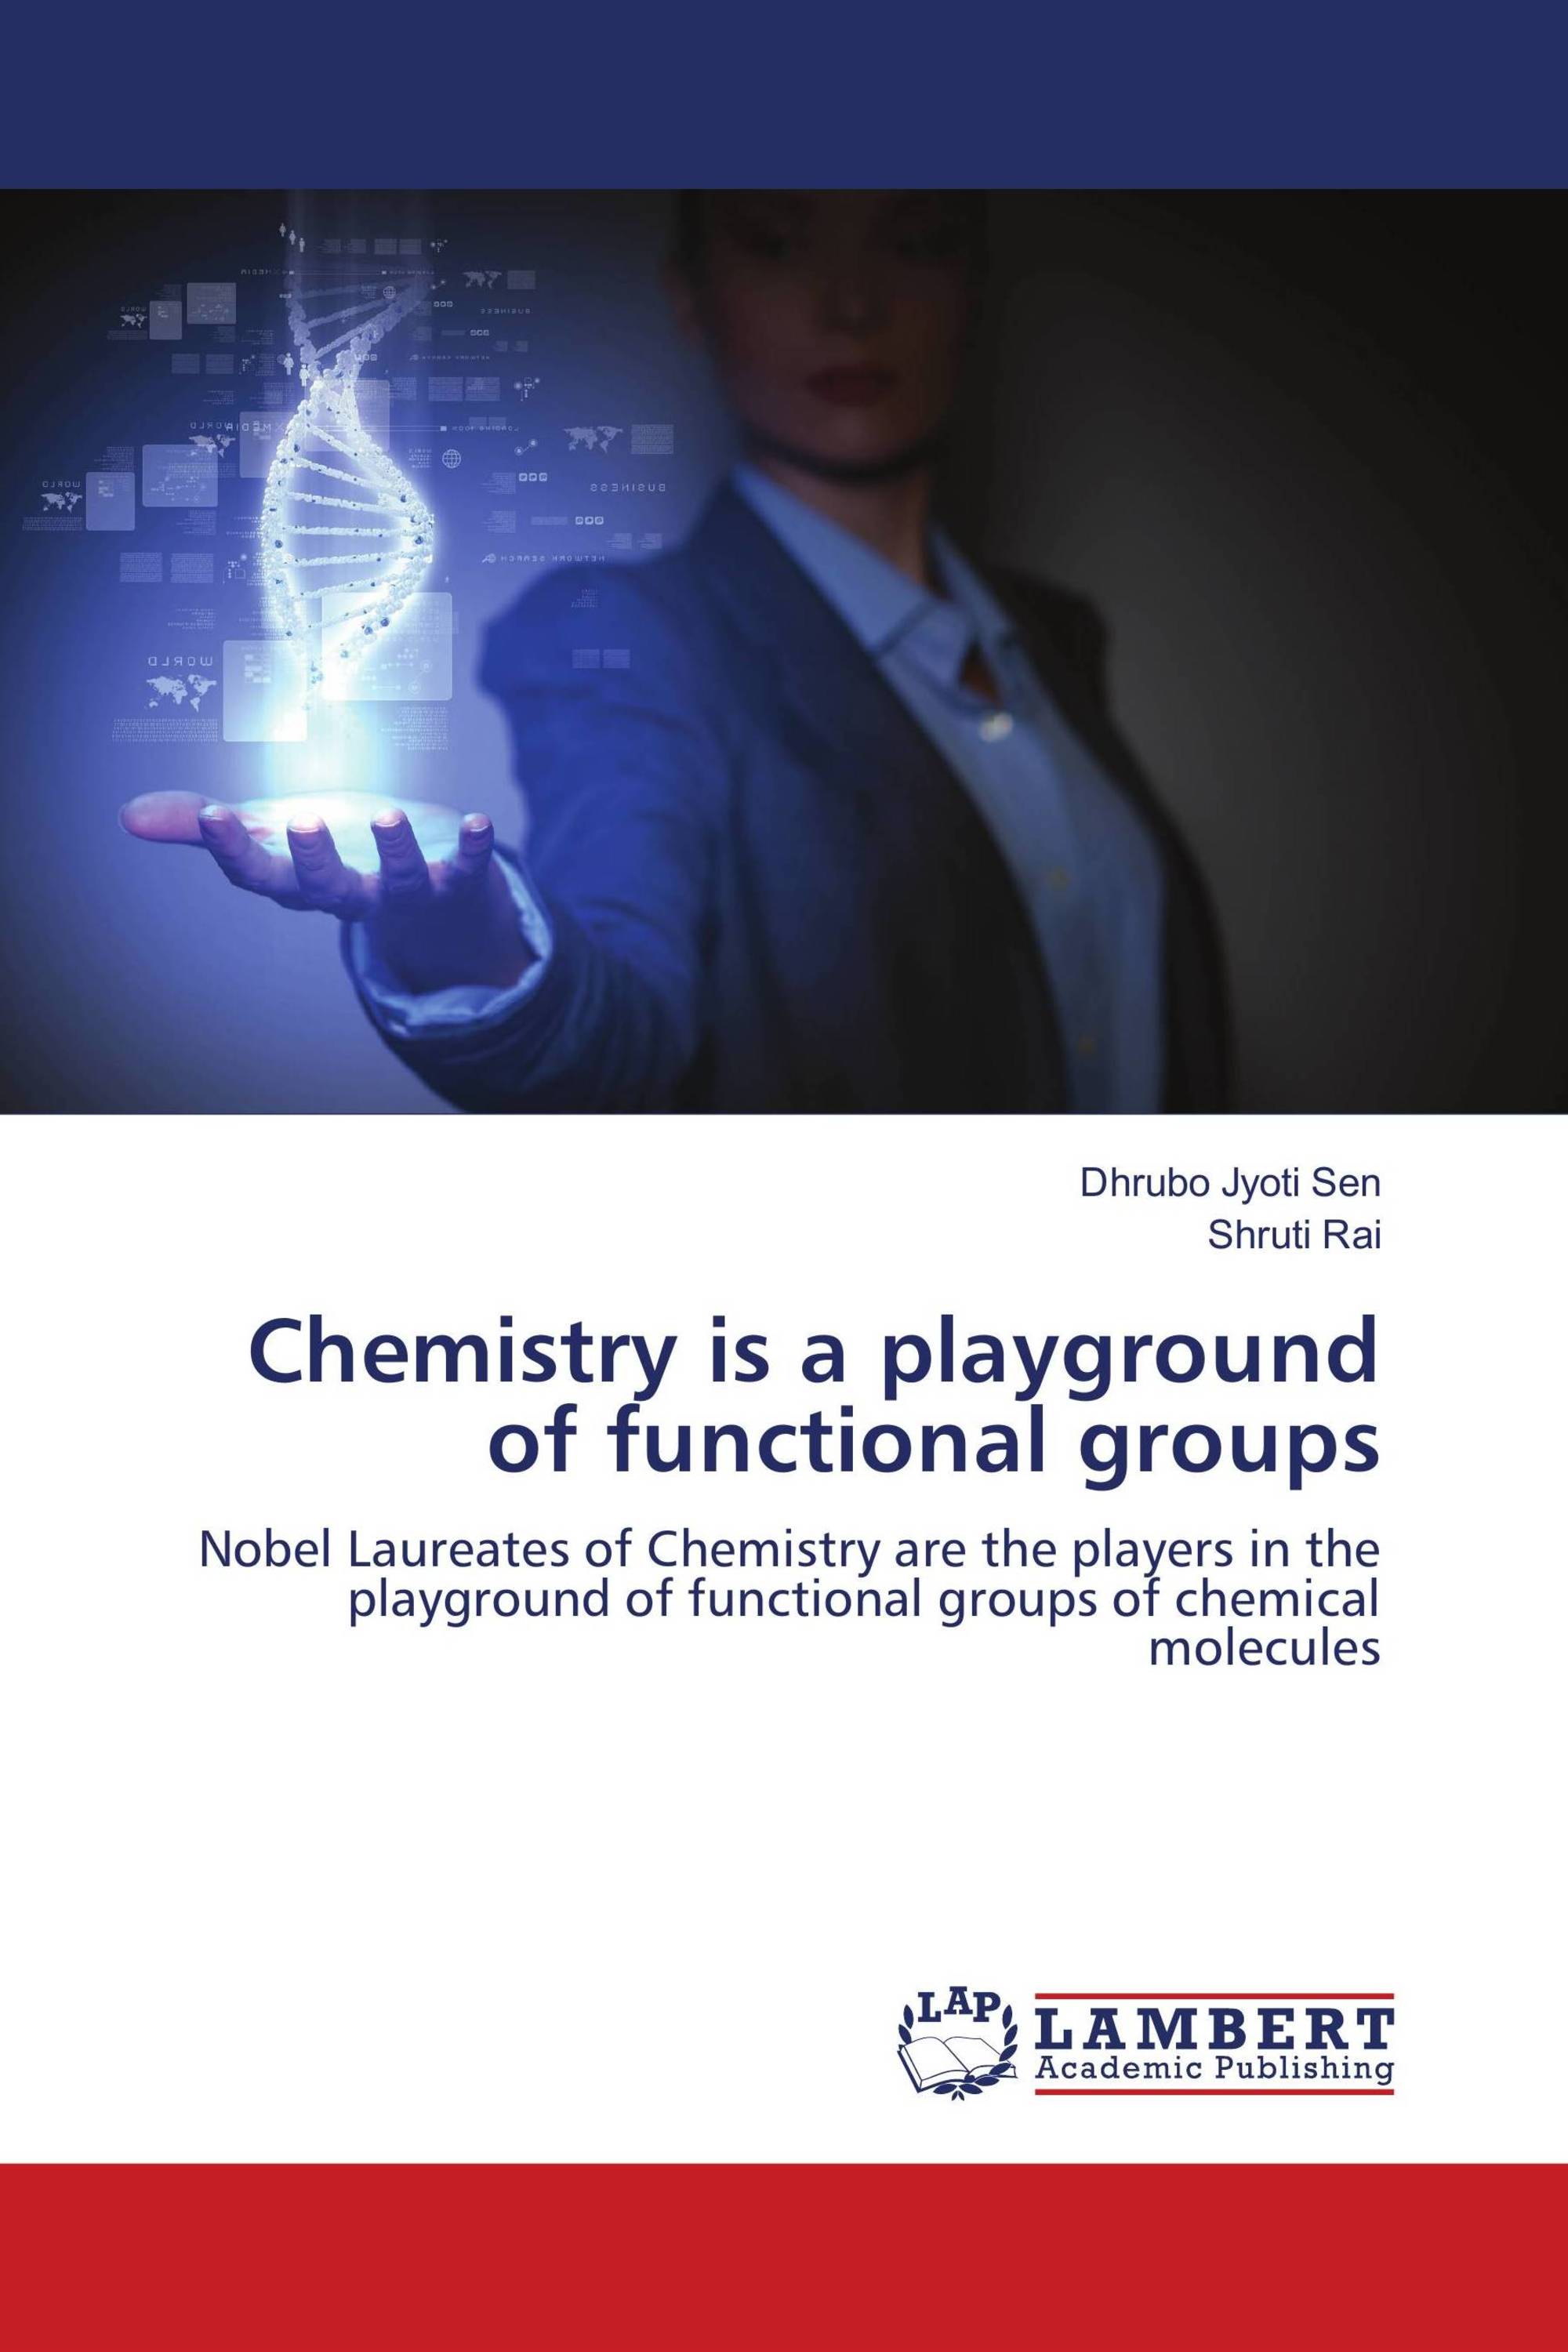 Chemistry is a playground of functional groups